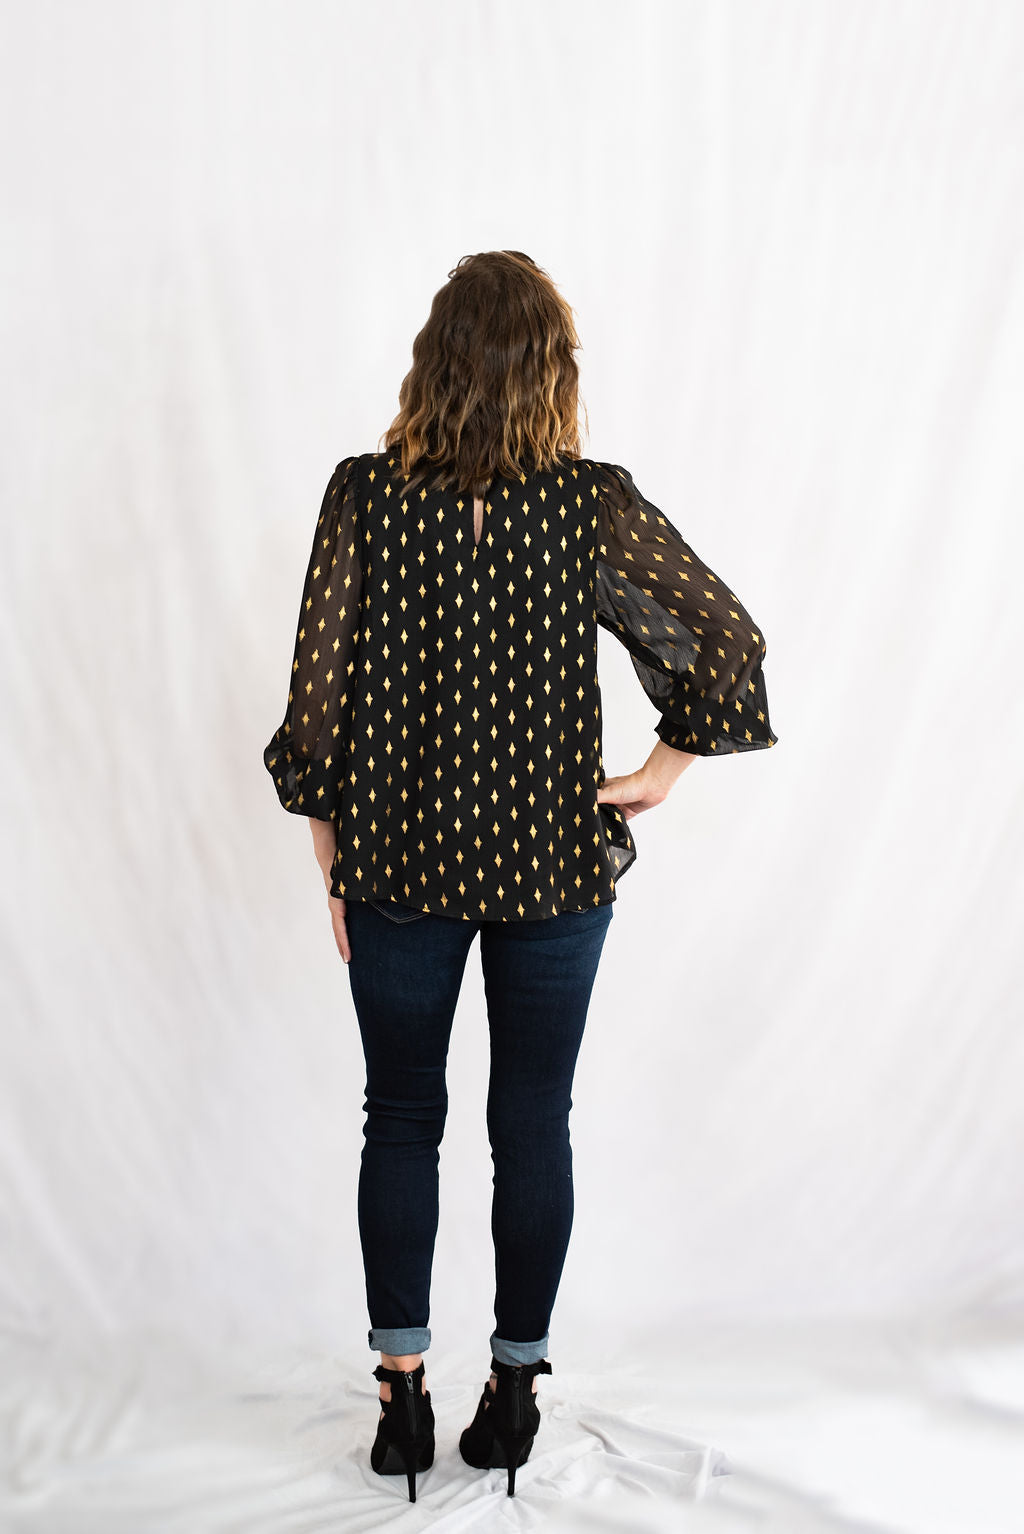 Reflective Foil Print Long Sleeve Top by Jodifl Clothing